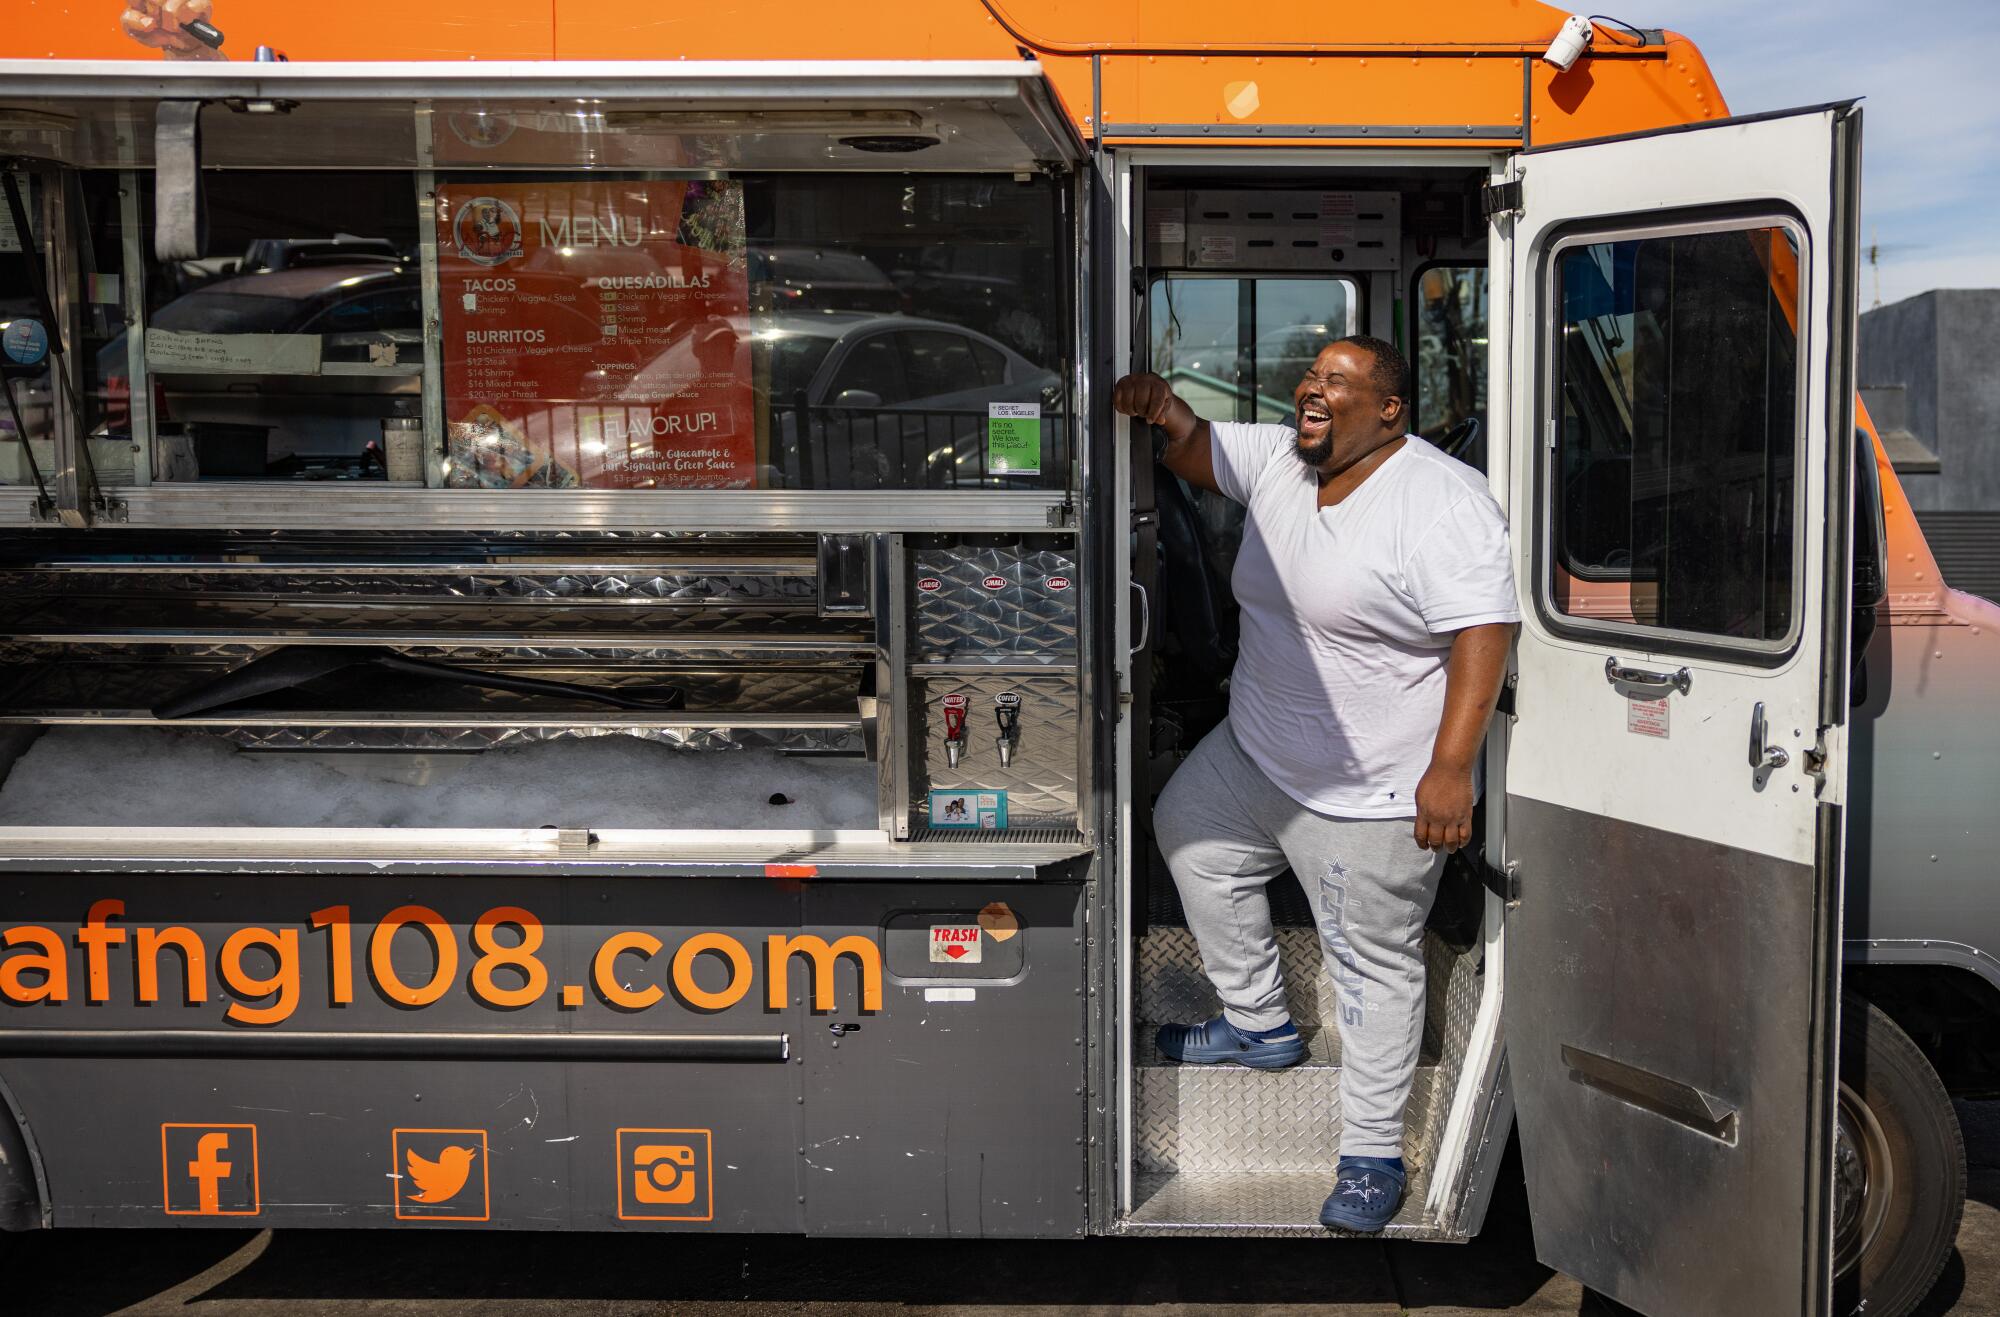 A man stands in the open door of a food truck